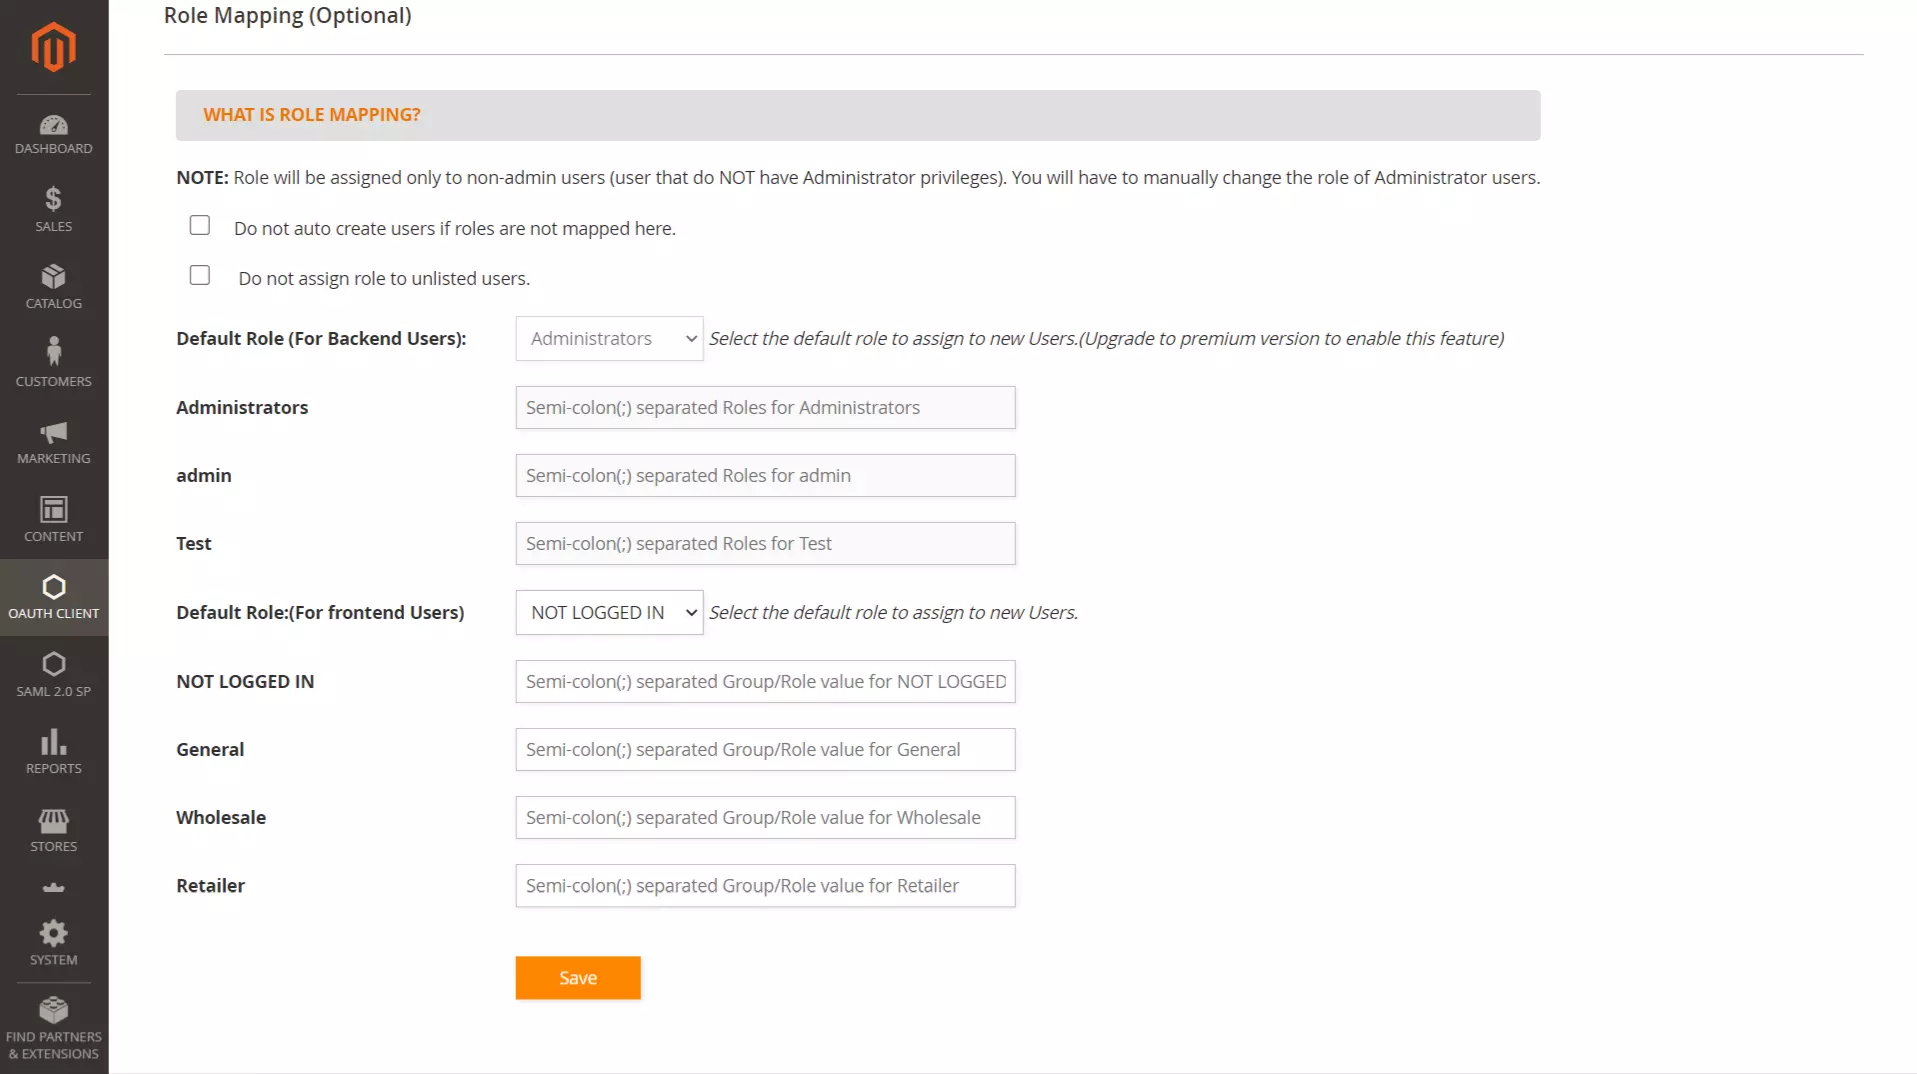 Canvas Magento SSO - Canvas Single Sign-On(SSO) Login in Magento - role mapping